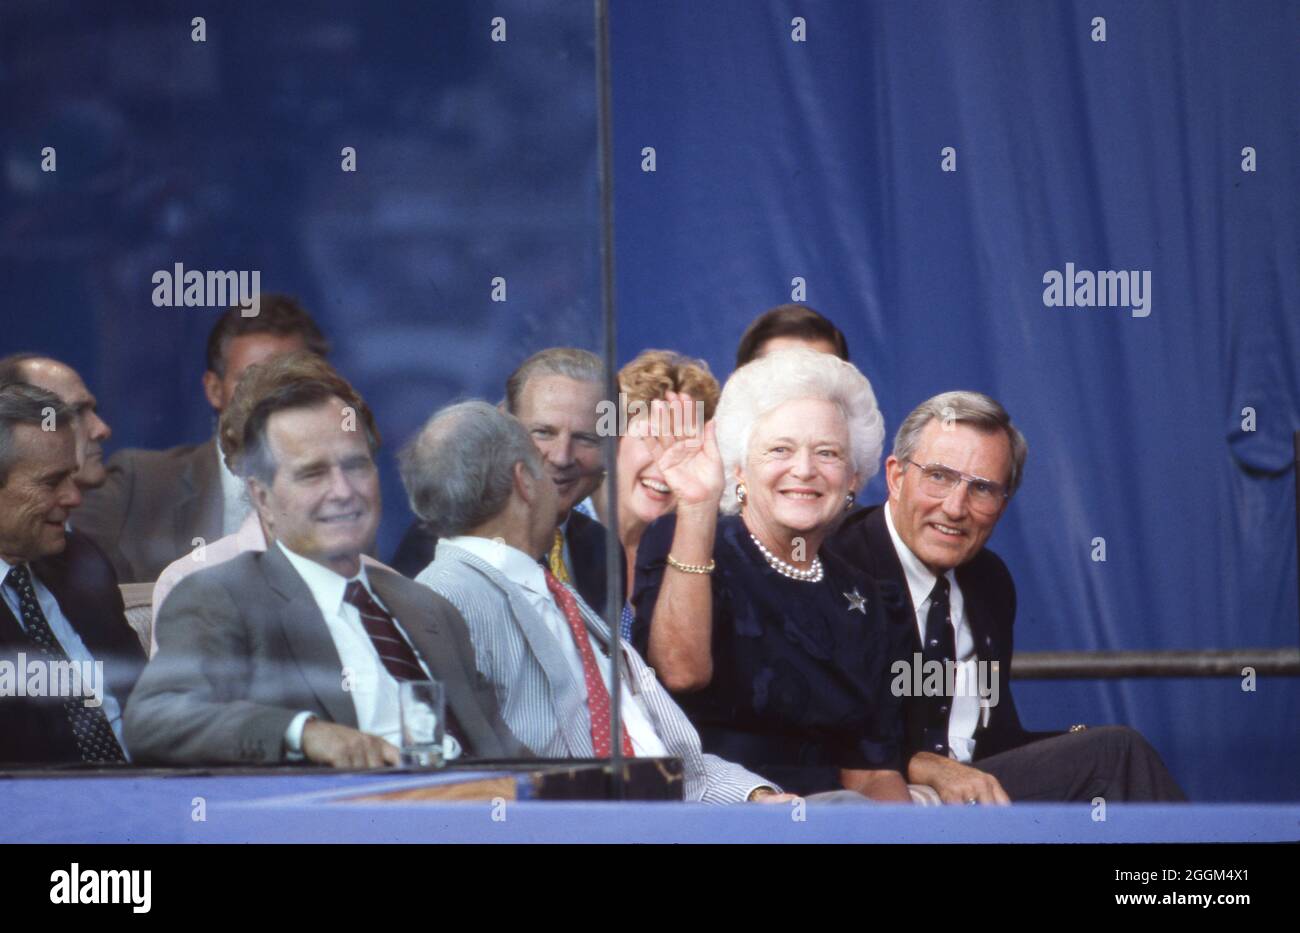 Houston Texas USA, July 1990: Bulletproof glass protects U.S. Pres. George H.W. Bush and First Lady Barbara Bush with other world leaders during a formal session at the Economic Summit of Industrialized Nations. ©Bob Daemmrich Stock Photo